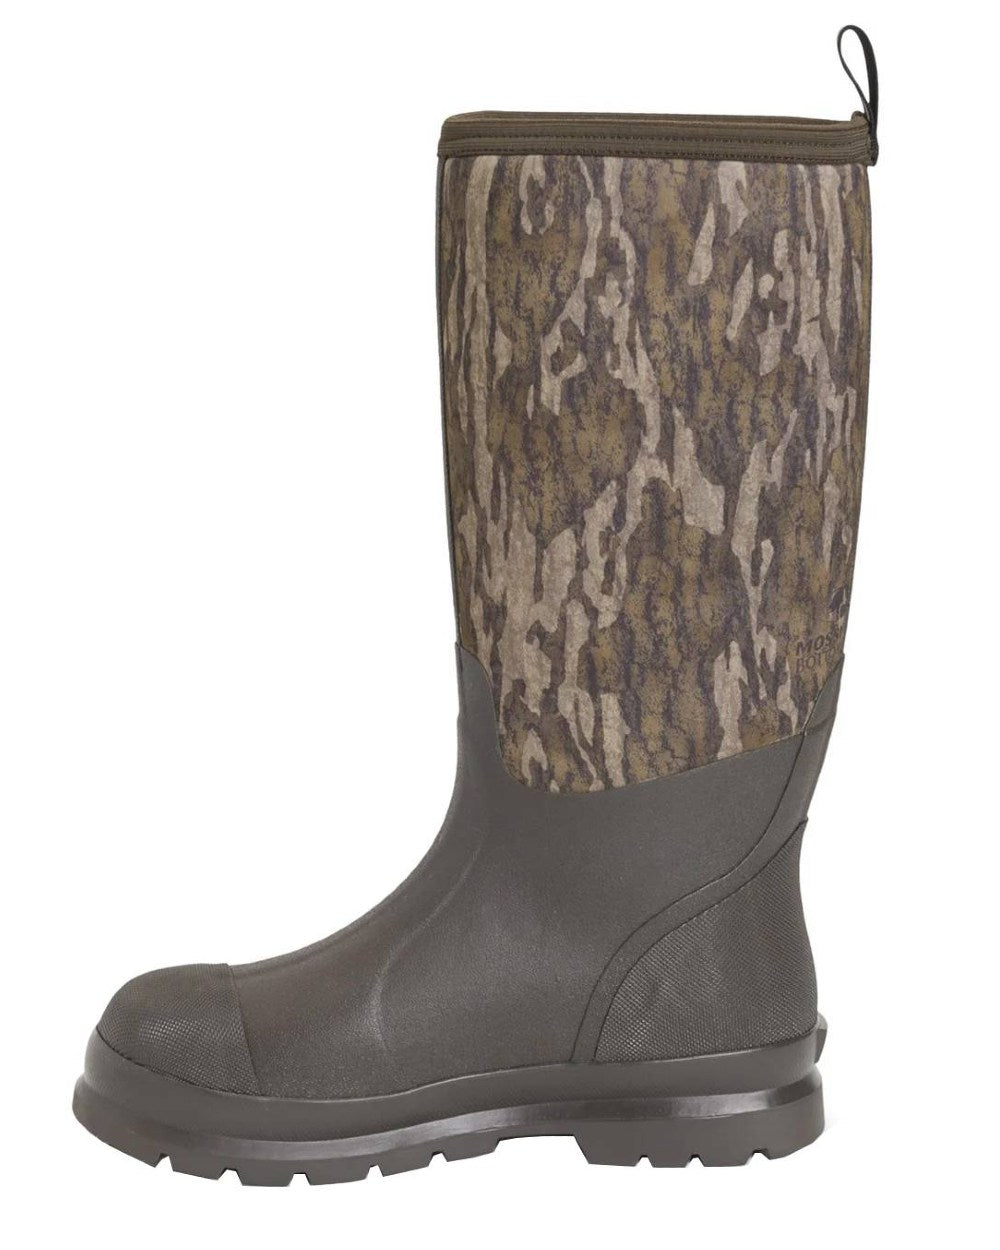 Mossy Oak Bottomlands Print Muck Boots Unisex Chore Gamekeeper Tall Wellingtons On A White Background